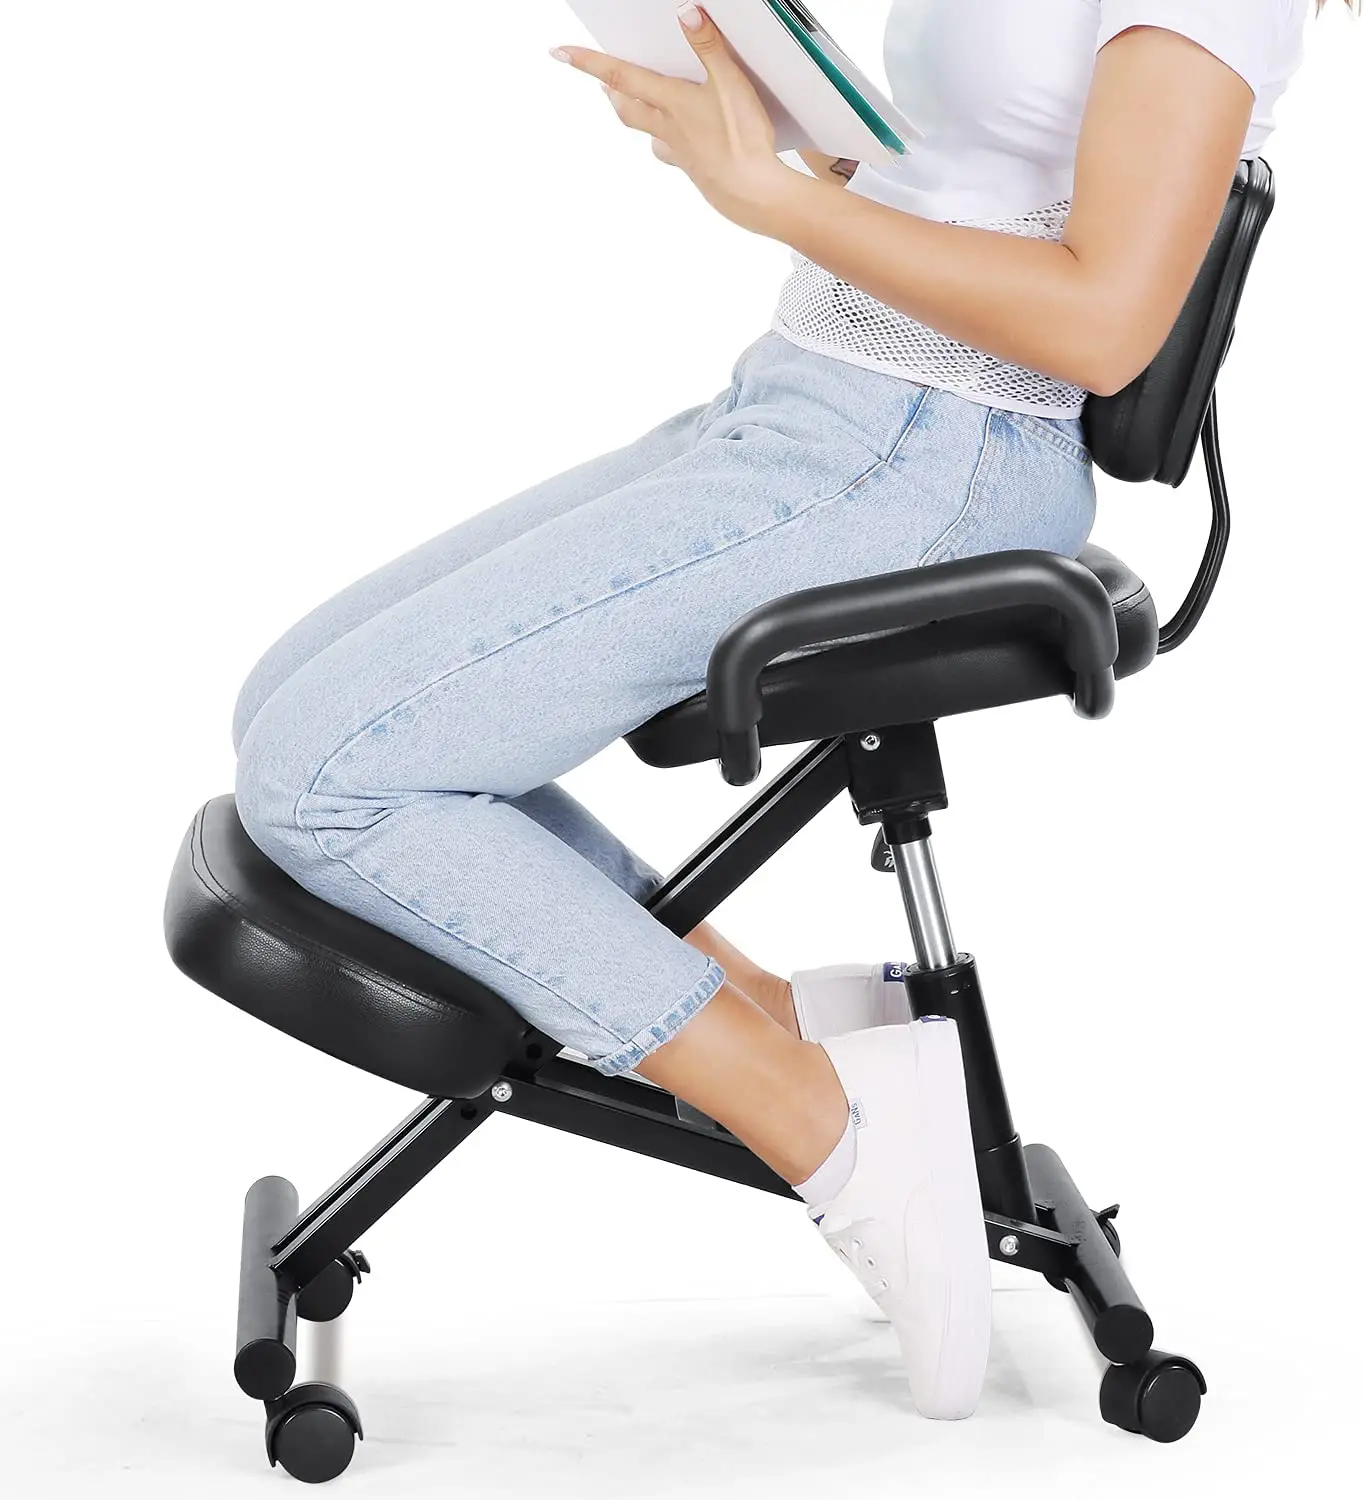 Ergonomic Kneeling Chair Office Home Chair with Adjustable Height for Posture Correct| Bad Backs | Neck Pain Relieving